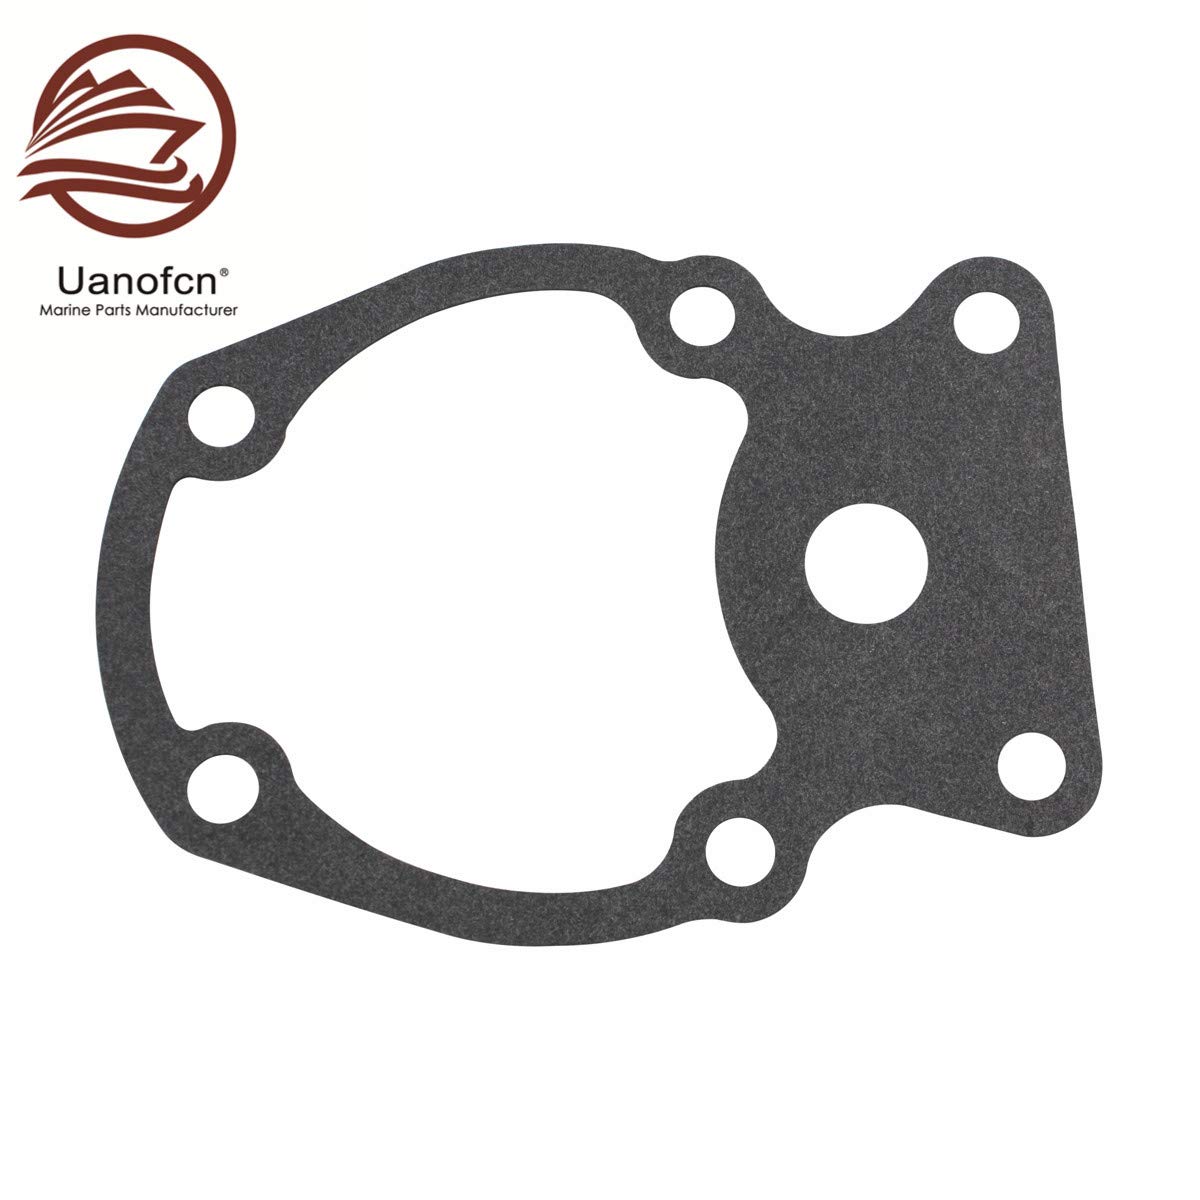 UanofCn 393630 Water Pump Impeller kit Replaces Johnson Evinrude OMC 20 25 30 35 HP Outboard Motors Sierra 18-3382